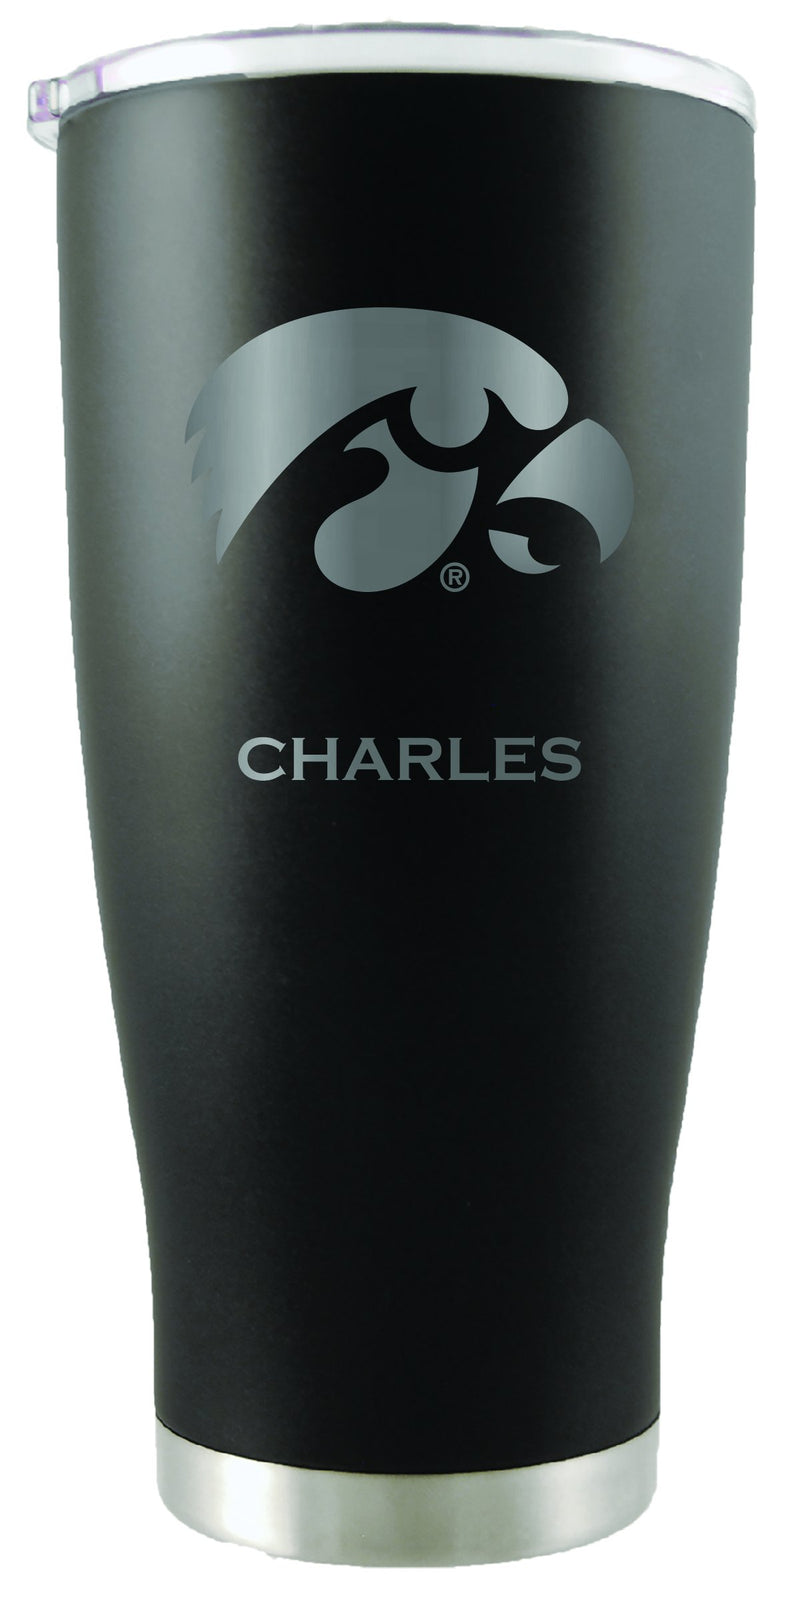 20oz Black Personalized Stainless Steel Tumbler | Iowa University
COL, CurrentProduct, Drinkware_category_All, IOW, Iowa Hawkeyes, Personalized_Personalized
The Memory Company